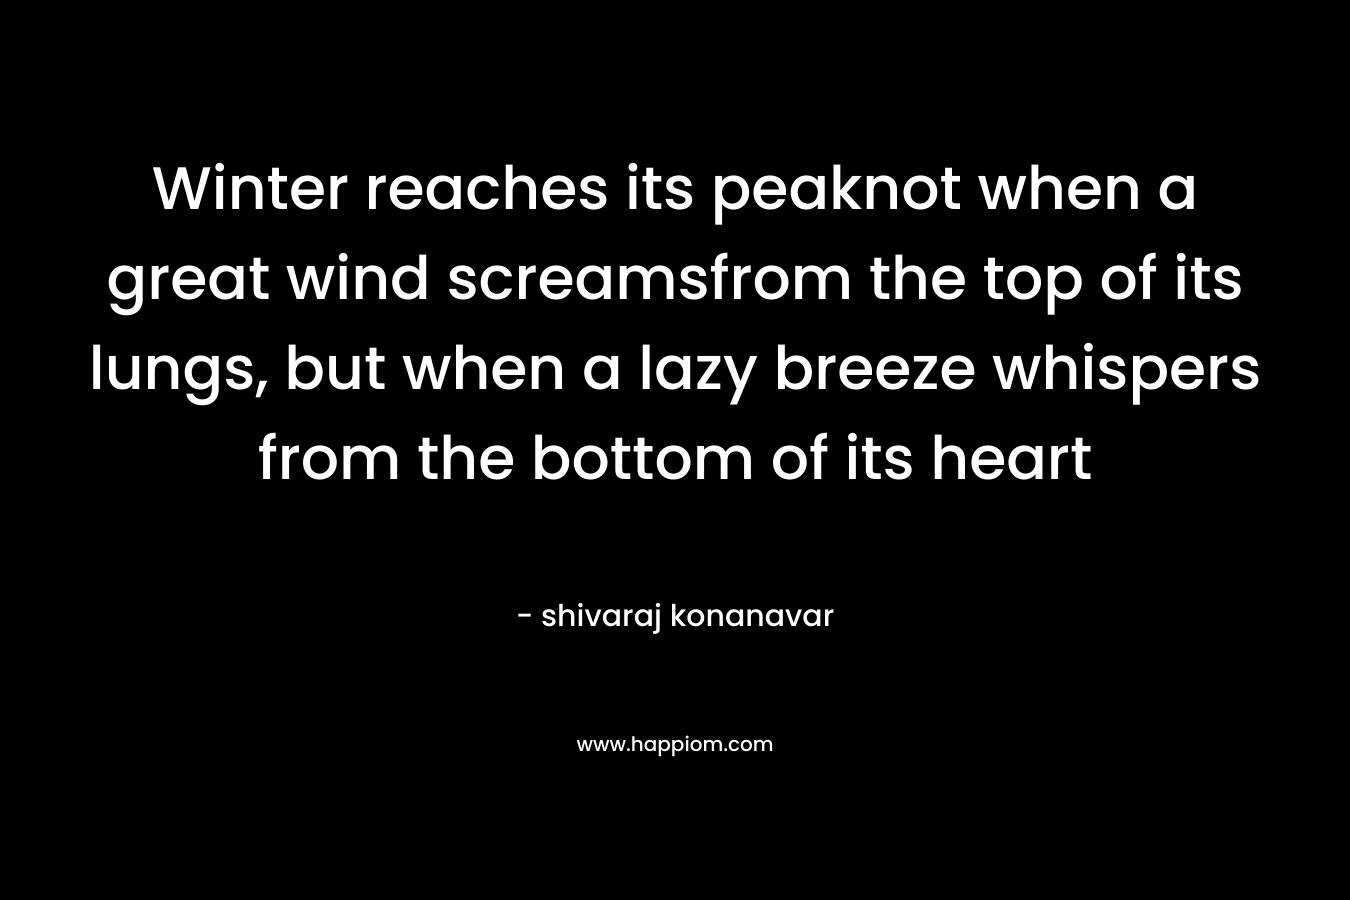 Winter reaches its peaknot when a great wind screamsfrom the top of its lungs, but when a lazy breeze whispers from the bottom of its heart – shivaraj konanavar